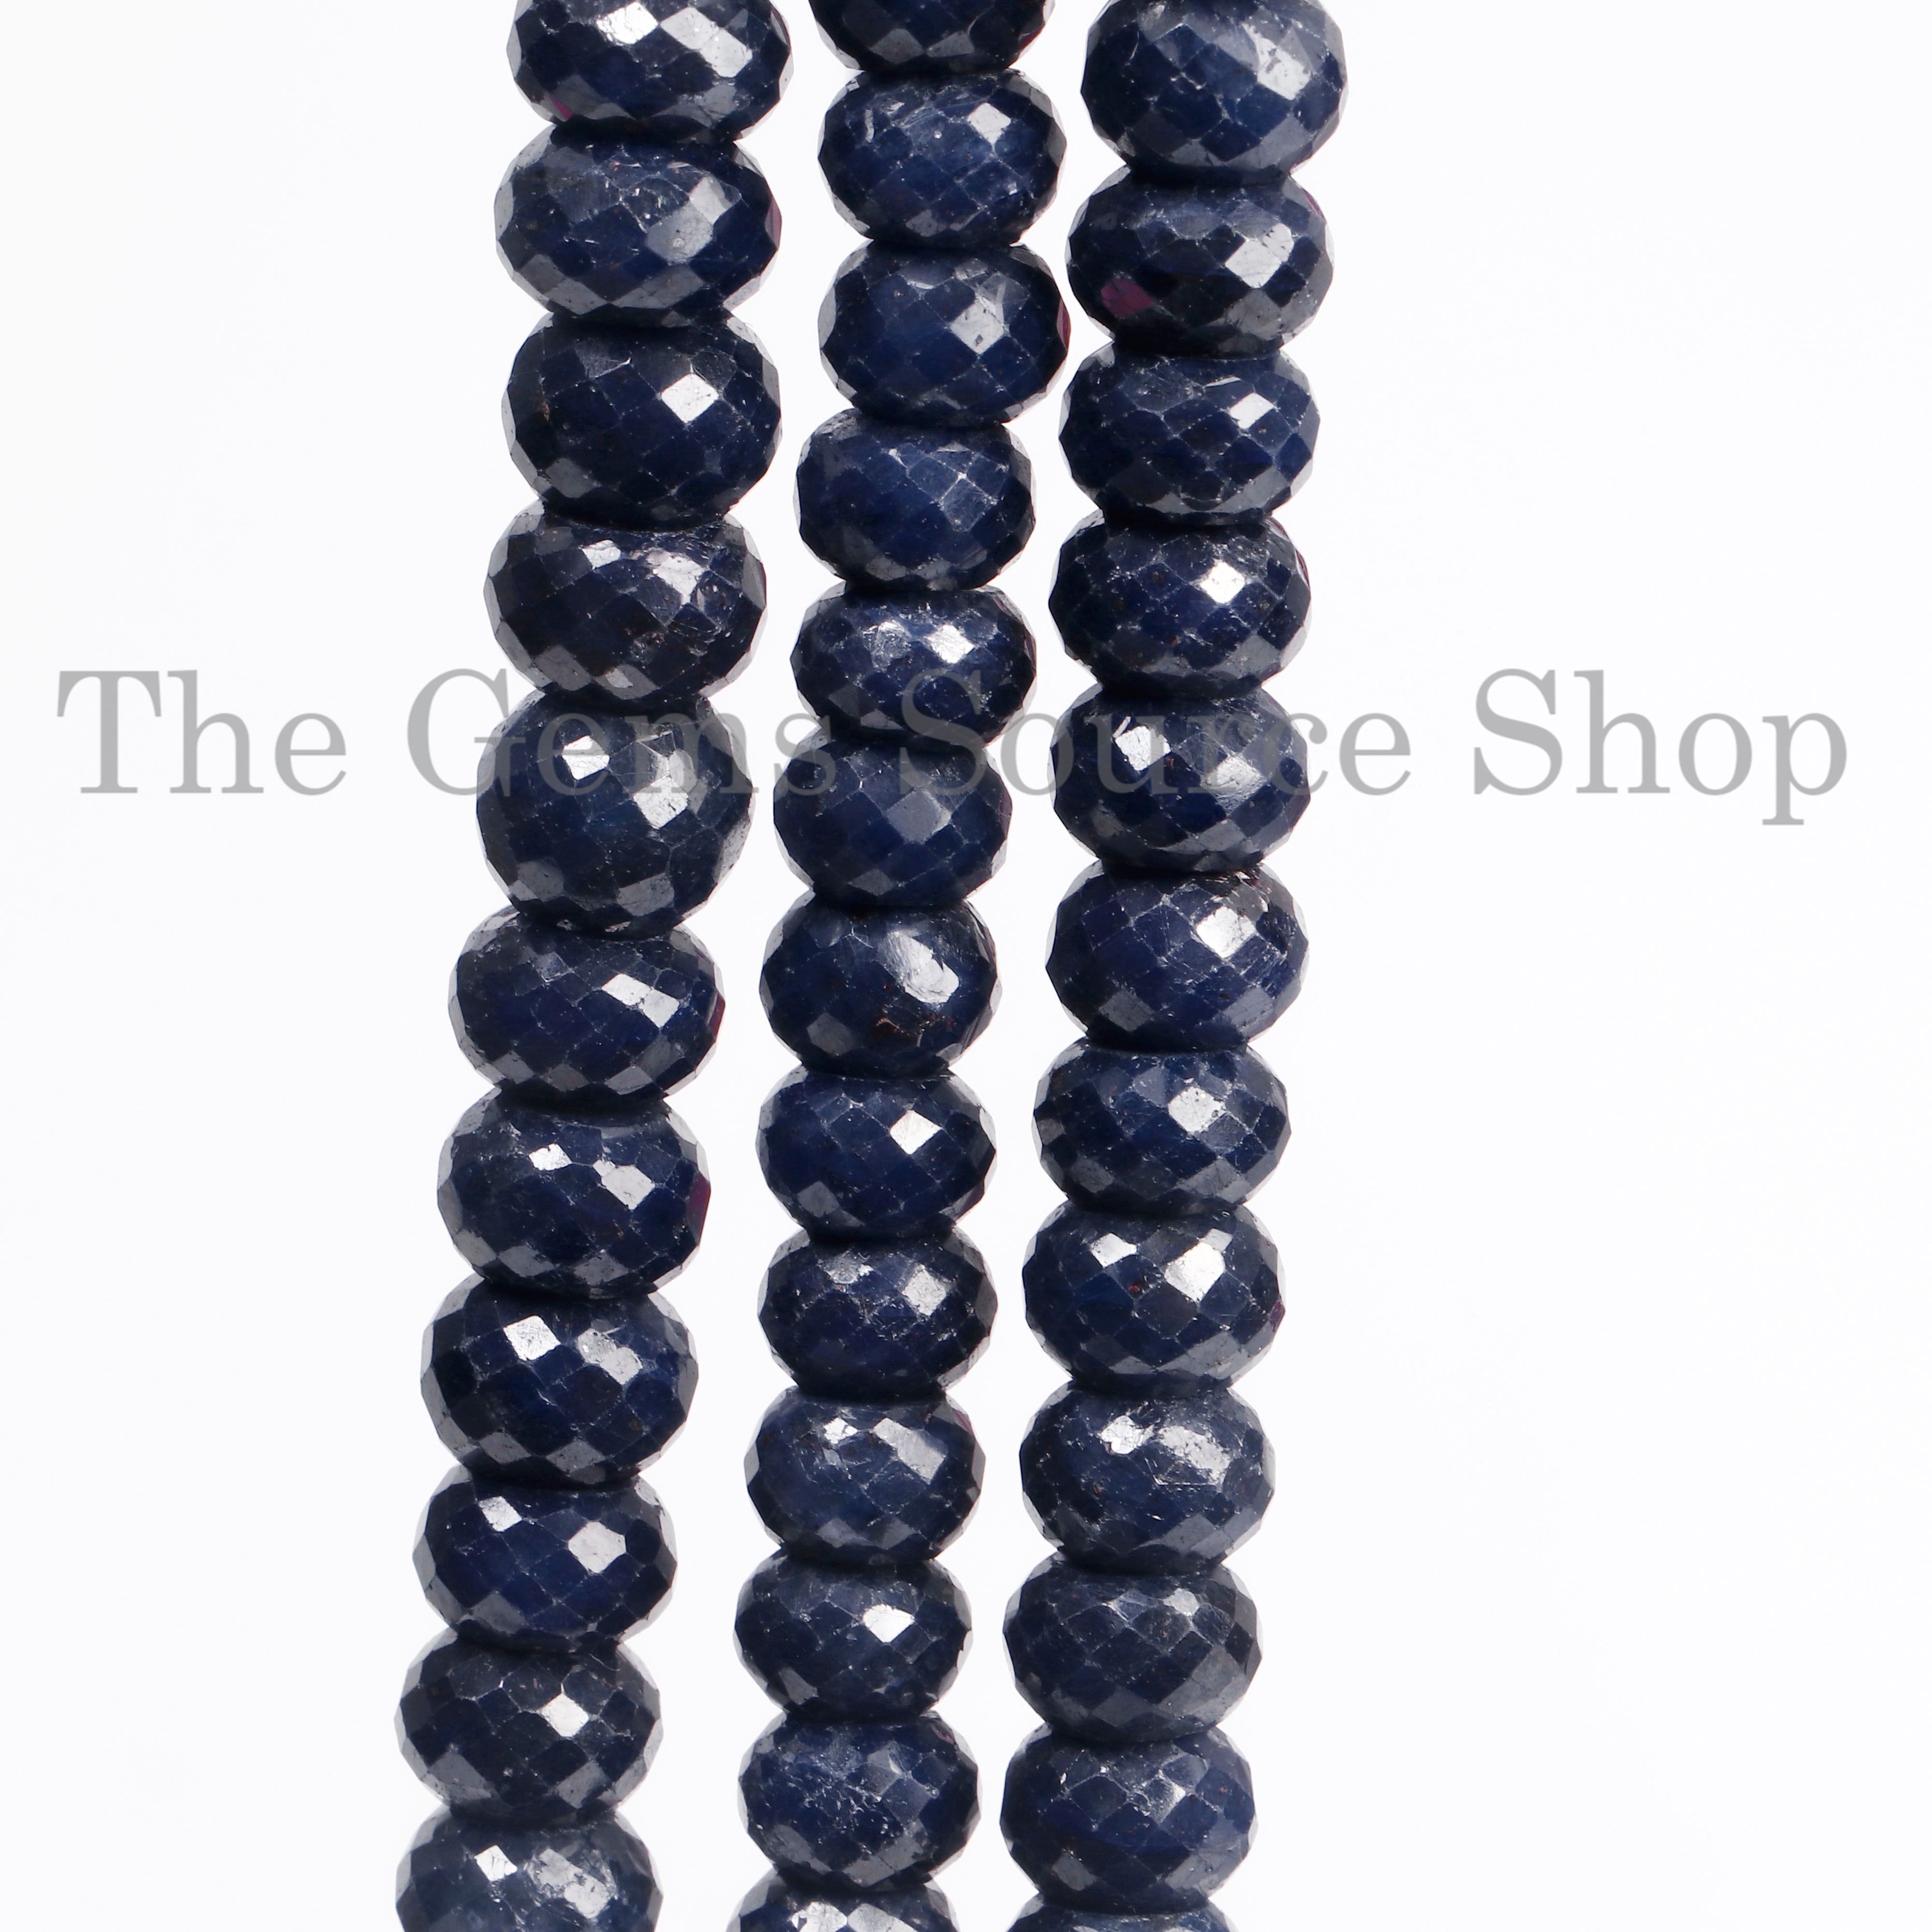 Blue Sapphire Beads, Sapphire Faceted Beads, Sapphire Rondelle Beads, Sapphire Gemstone Beads